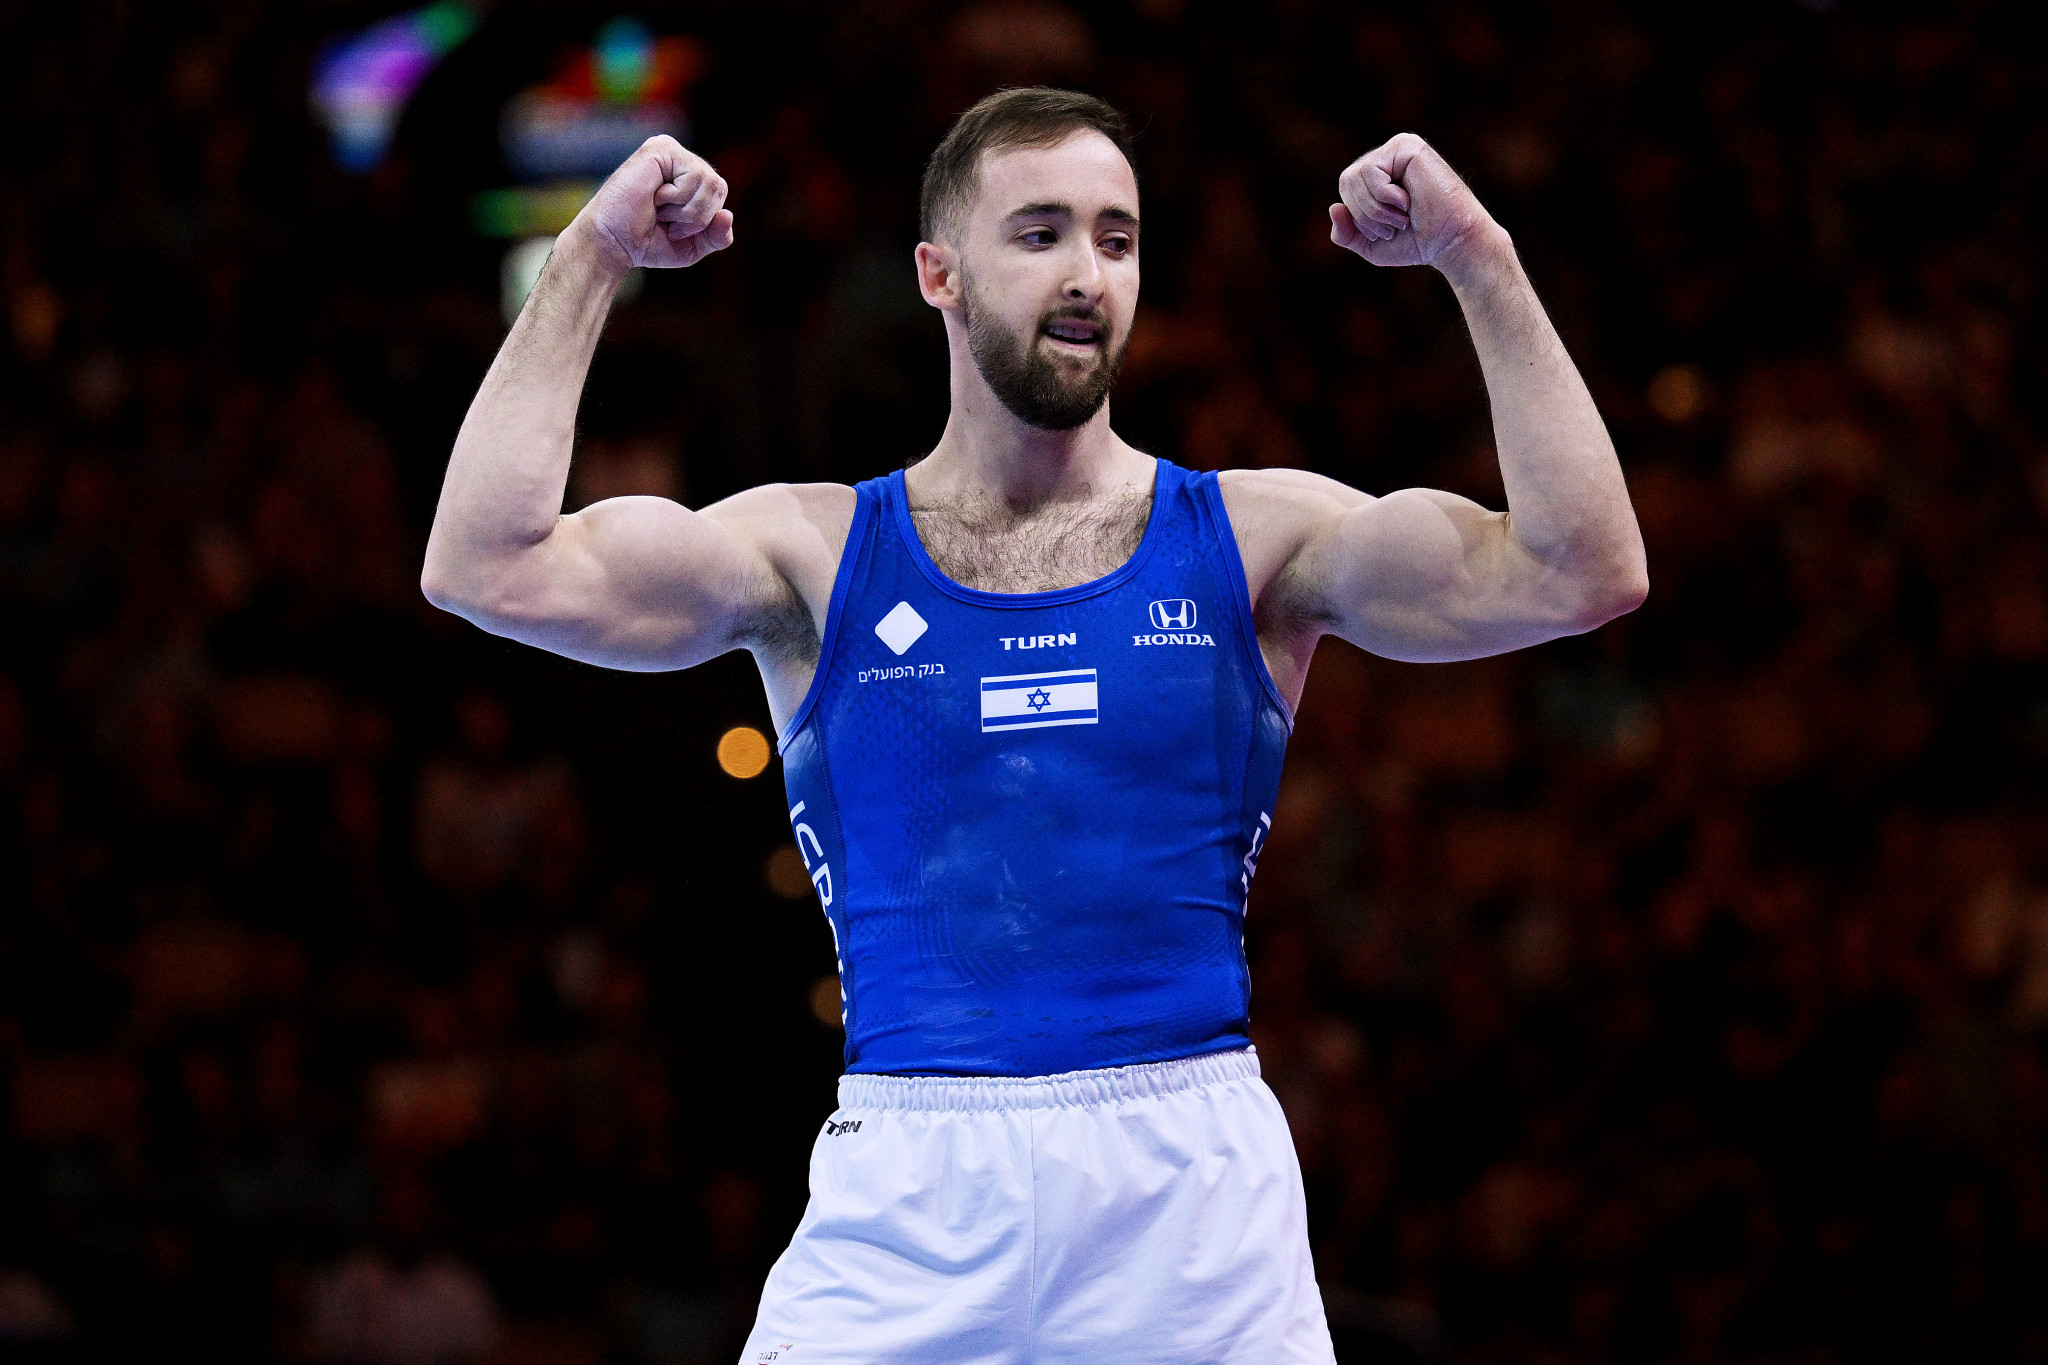 Israel's Artem Dolgopyat won the men's floor exercise title at the Munich 2022 European Championships, as he did at the Tokyo 2020 Olympics ©Getty Images